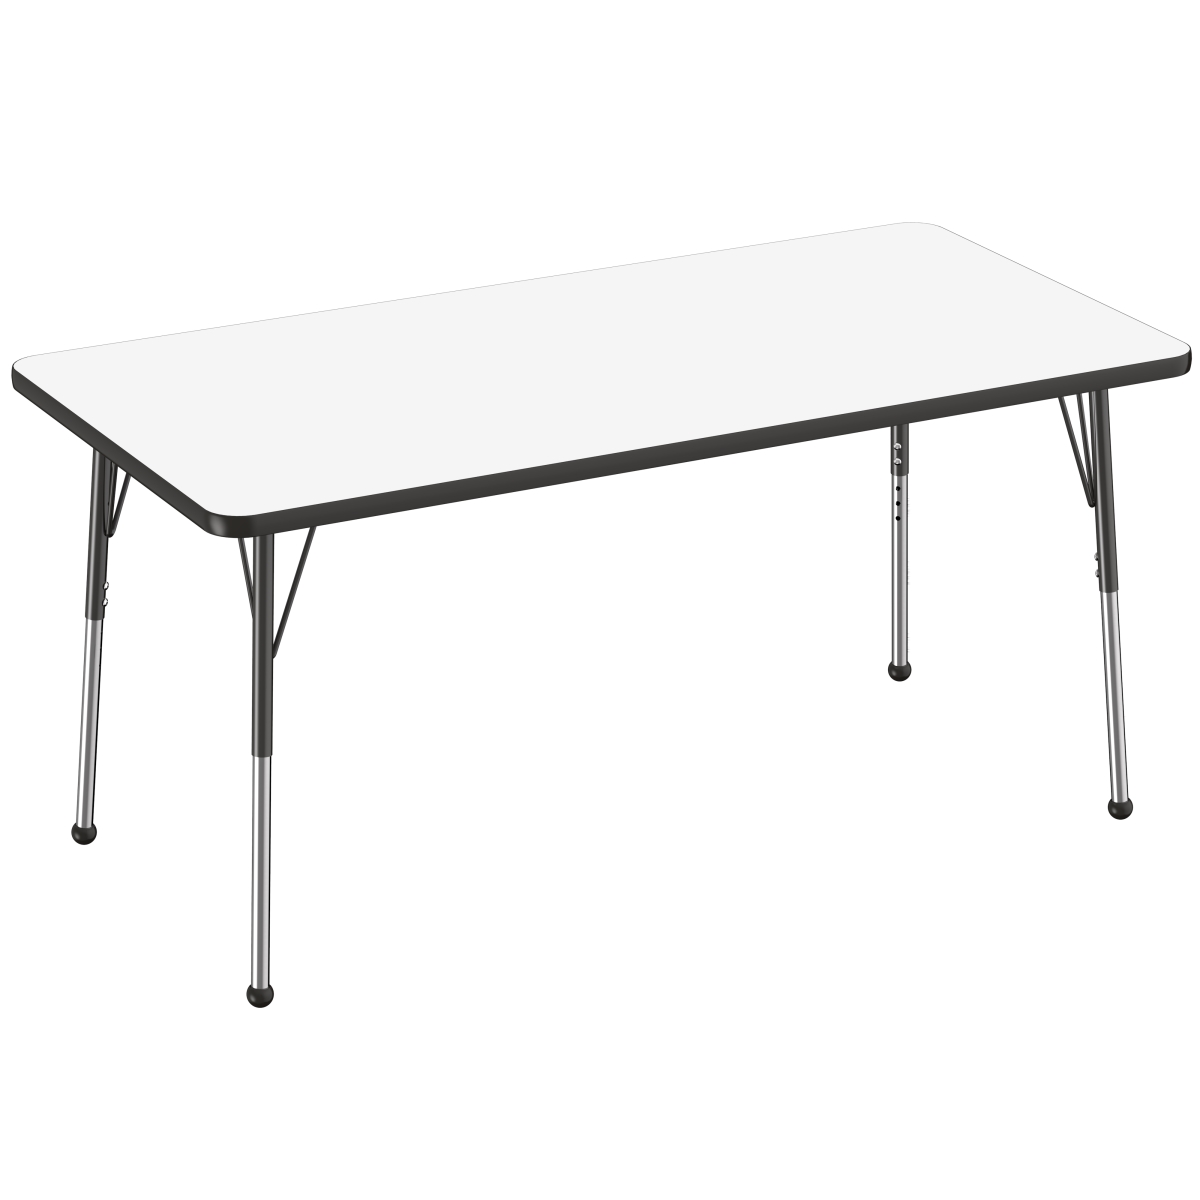 10177-debk 30 X 60 In. Rectangle Dry-erase Adjustable Activity Table With Standard Ball - Black